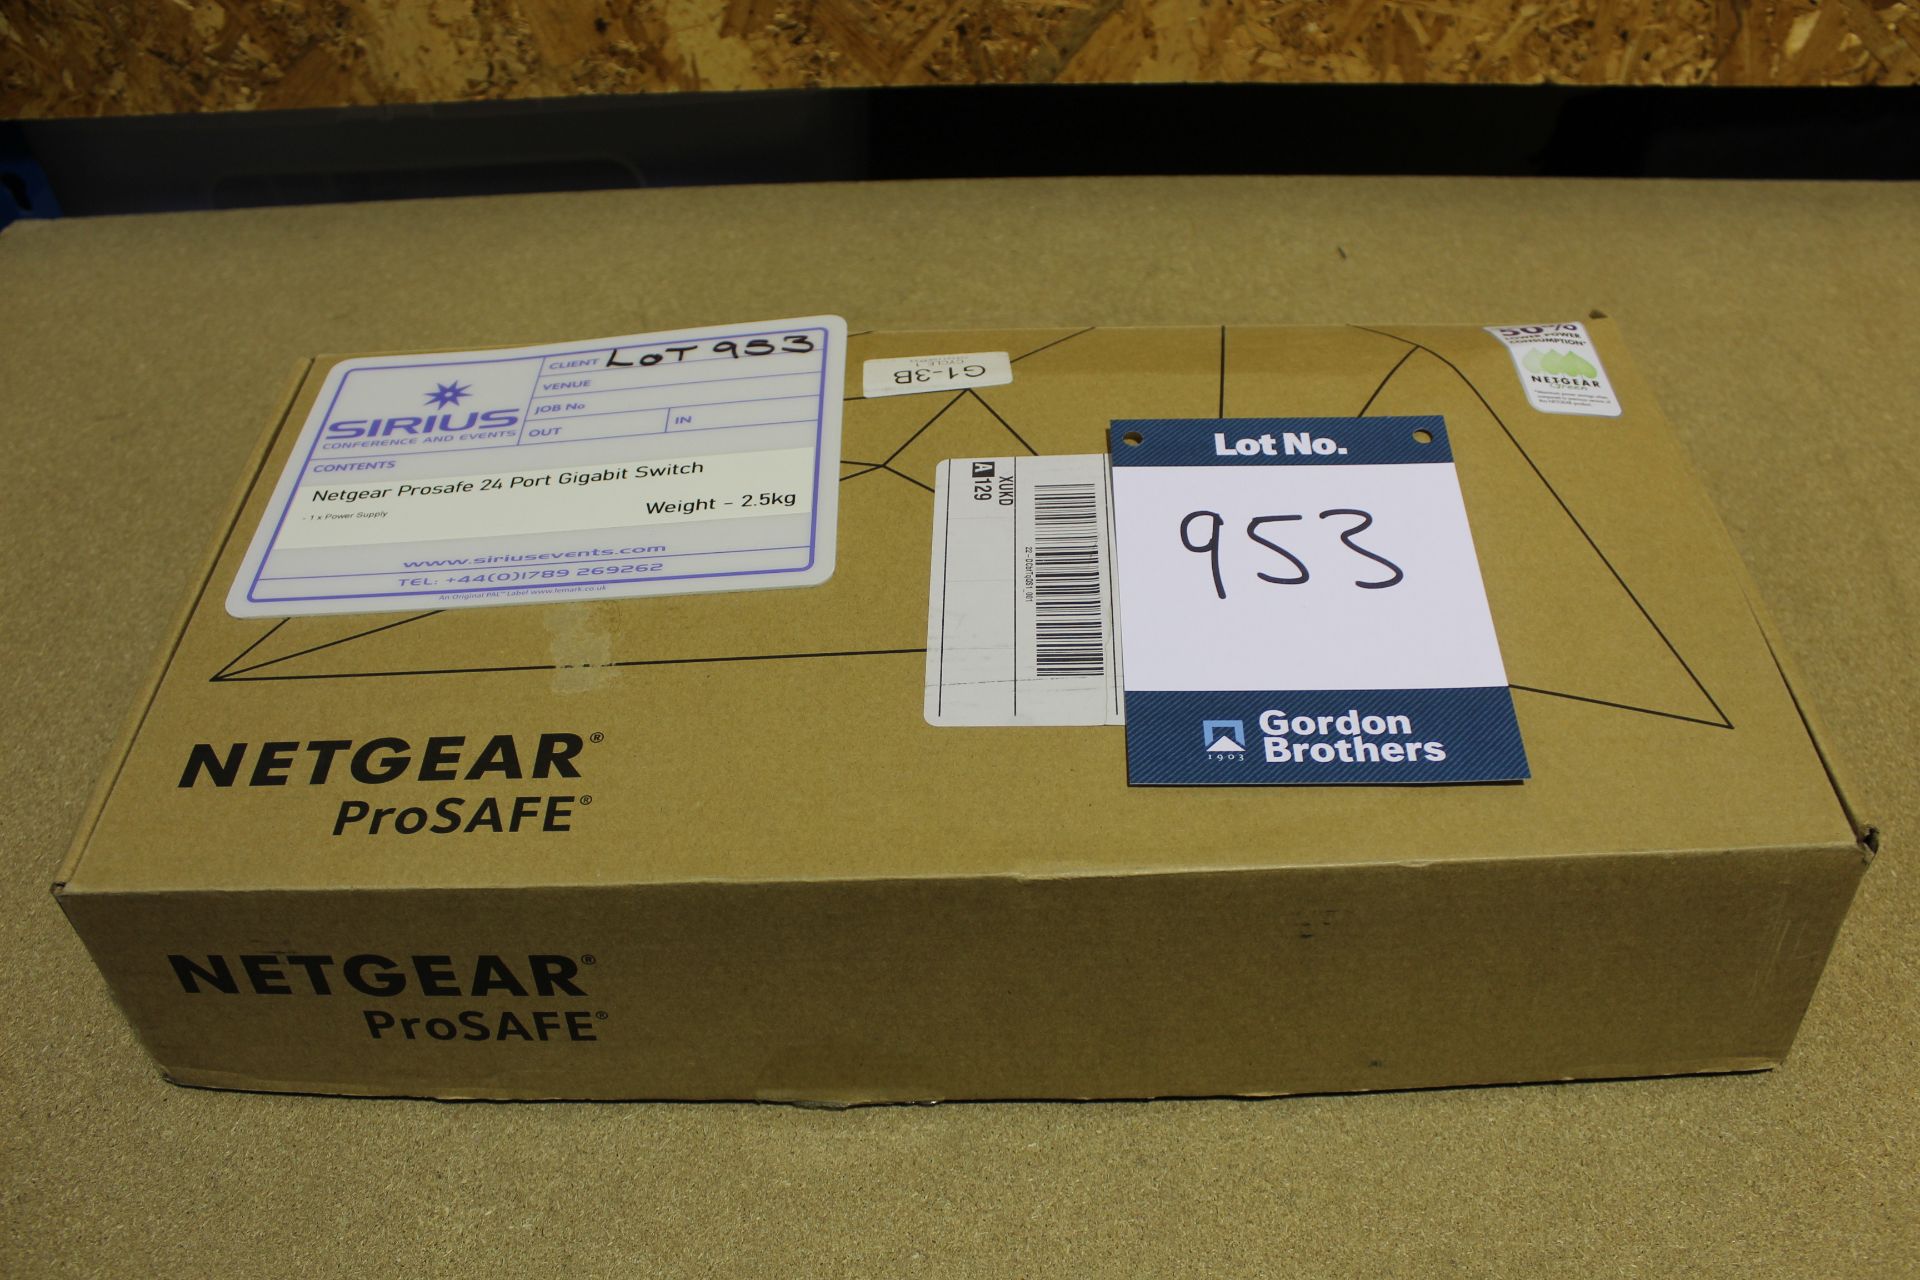 Netgear Prosafe JGS524 v2 24 Port Gigabit Ethernet Switch with 1x IEC in box (Purchased in 2019). - Image 3 of 3